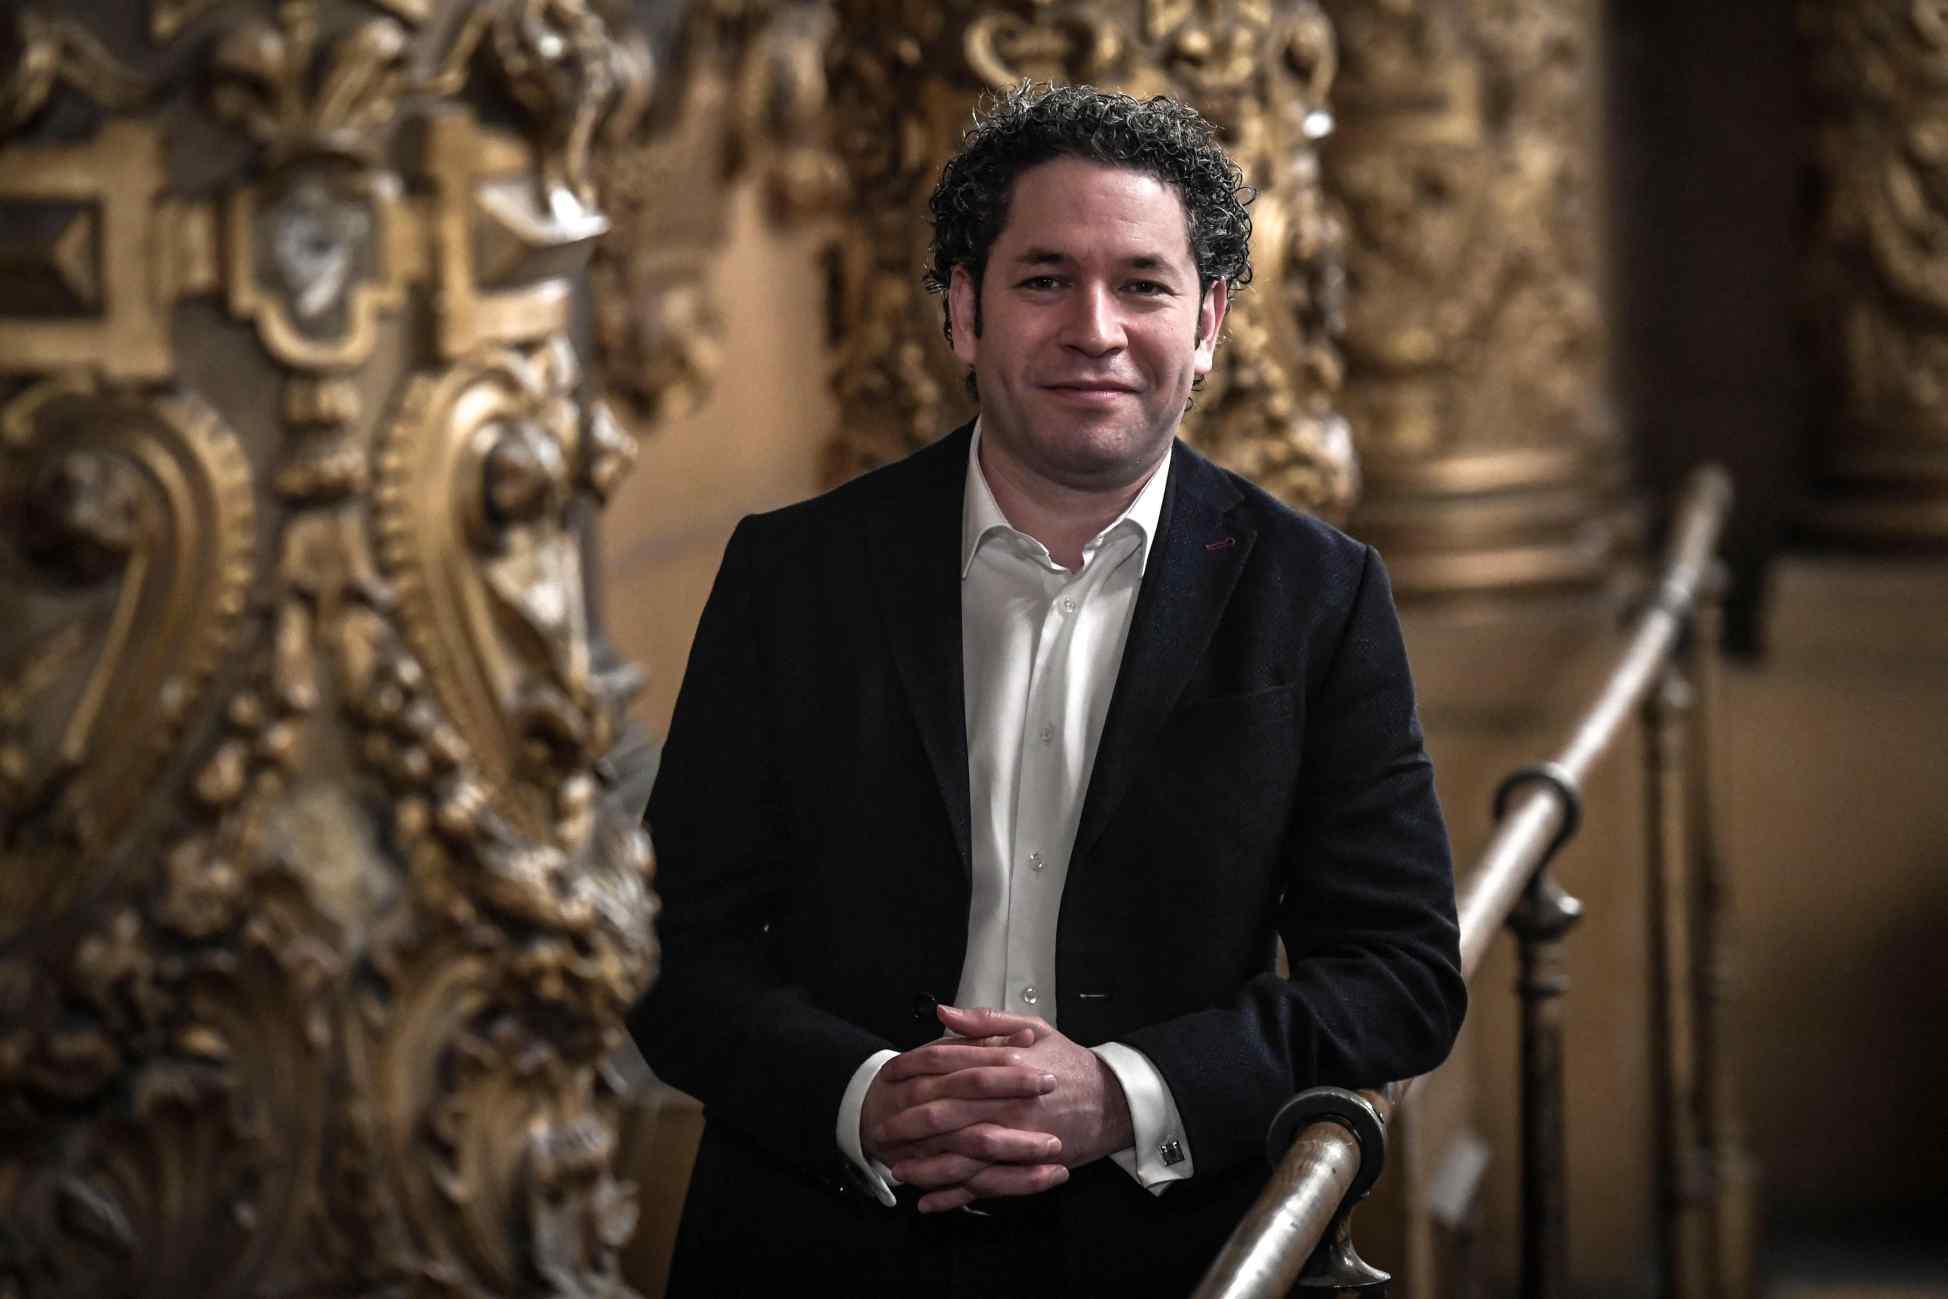 Musical Director of the Paris Opera Gustavo Dudamel and his wife